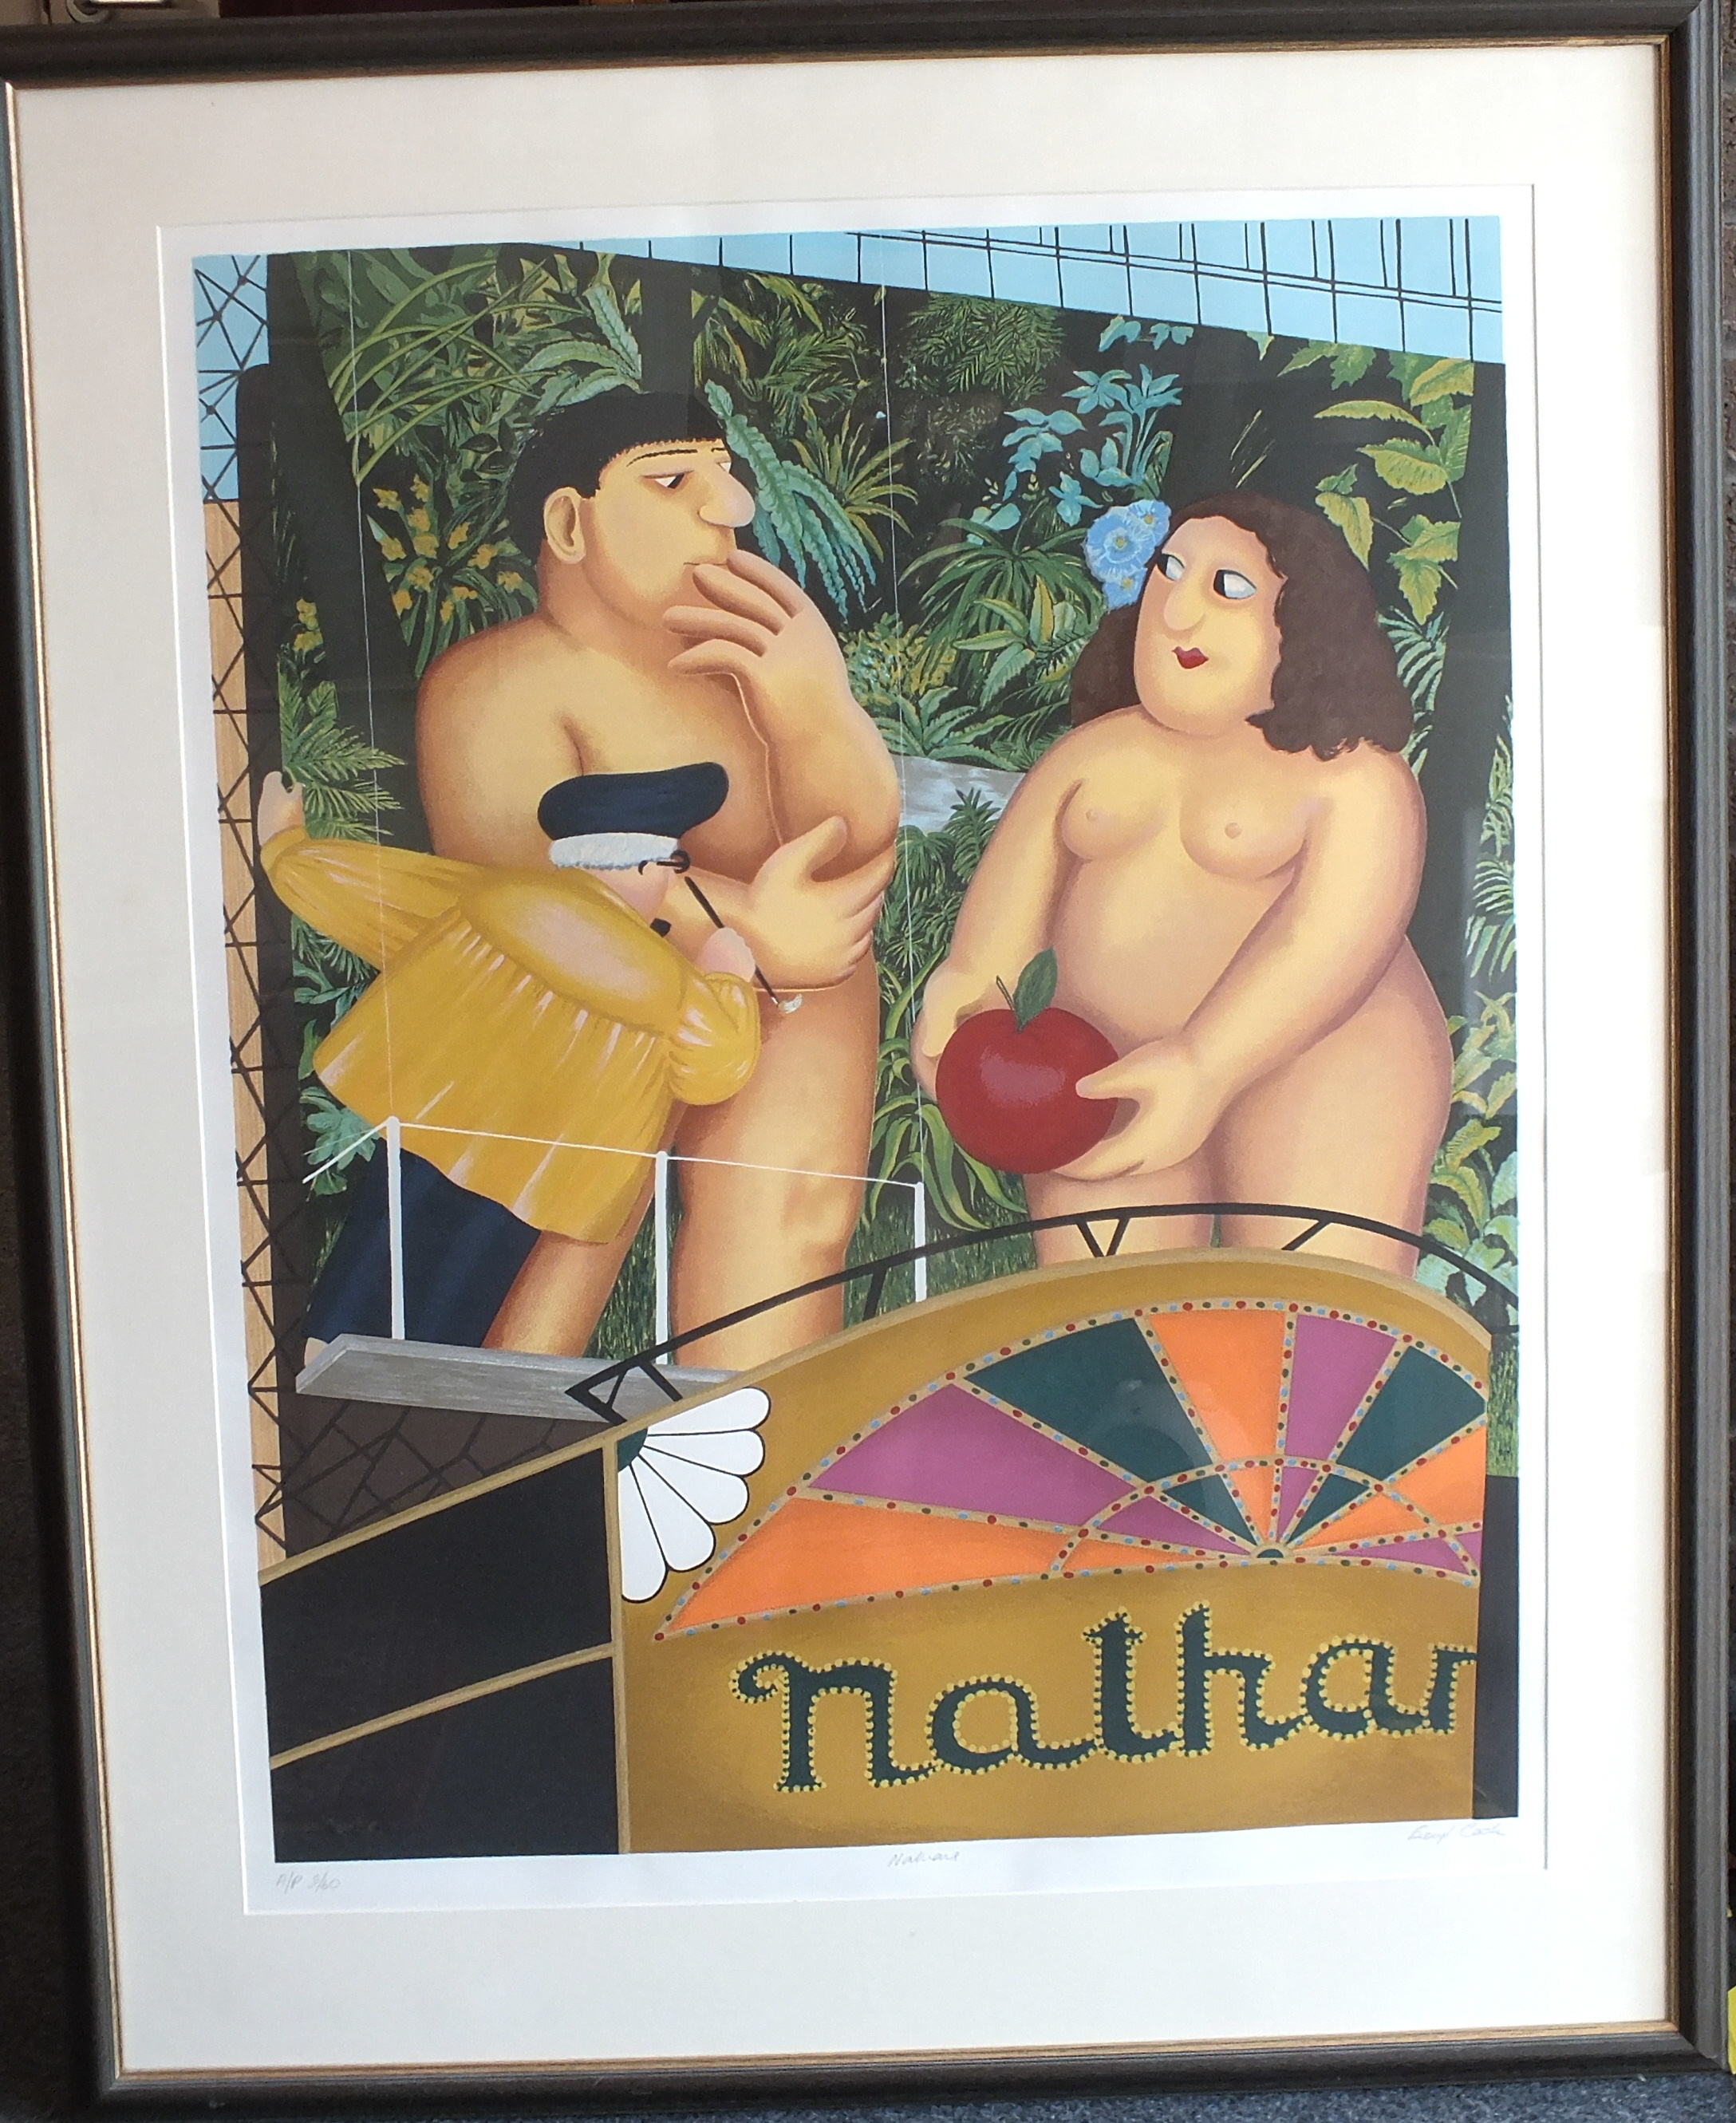 •After Beryl Cook (1926-2008), "Nathan's", a coloured print, artist's proof, 3/60, signed and titled